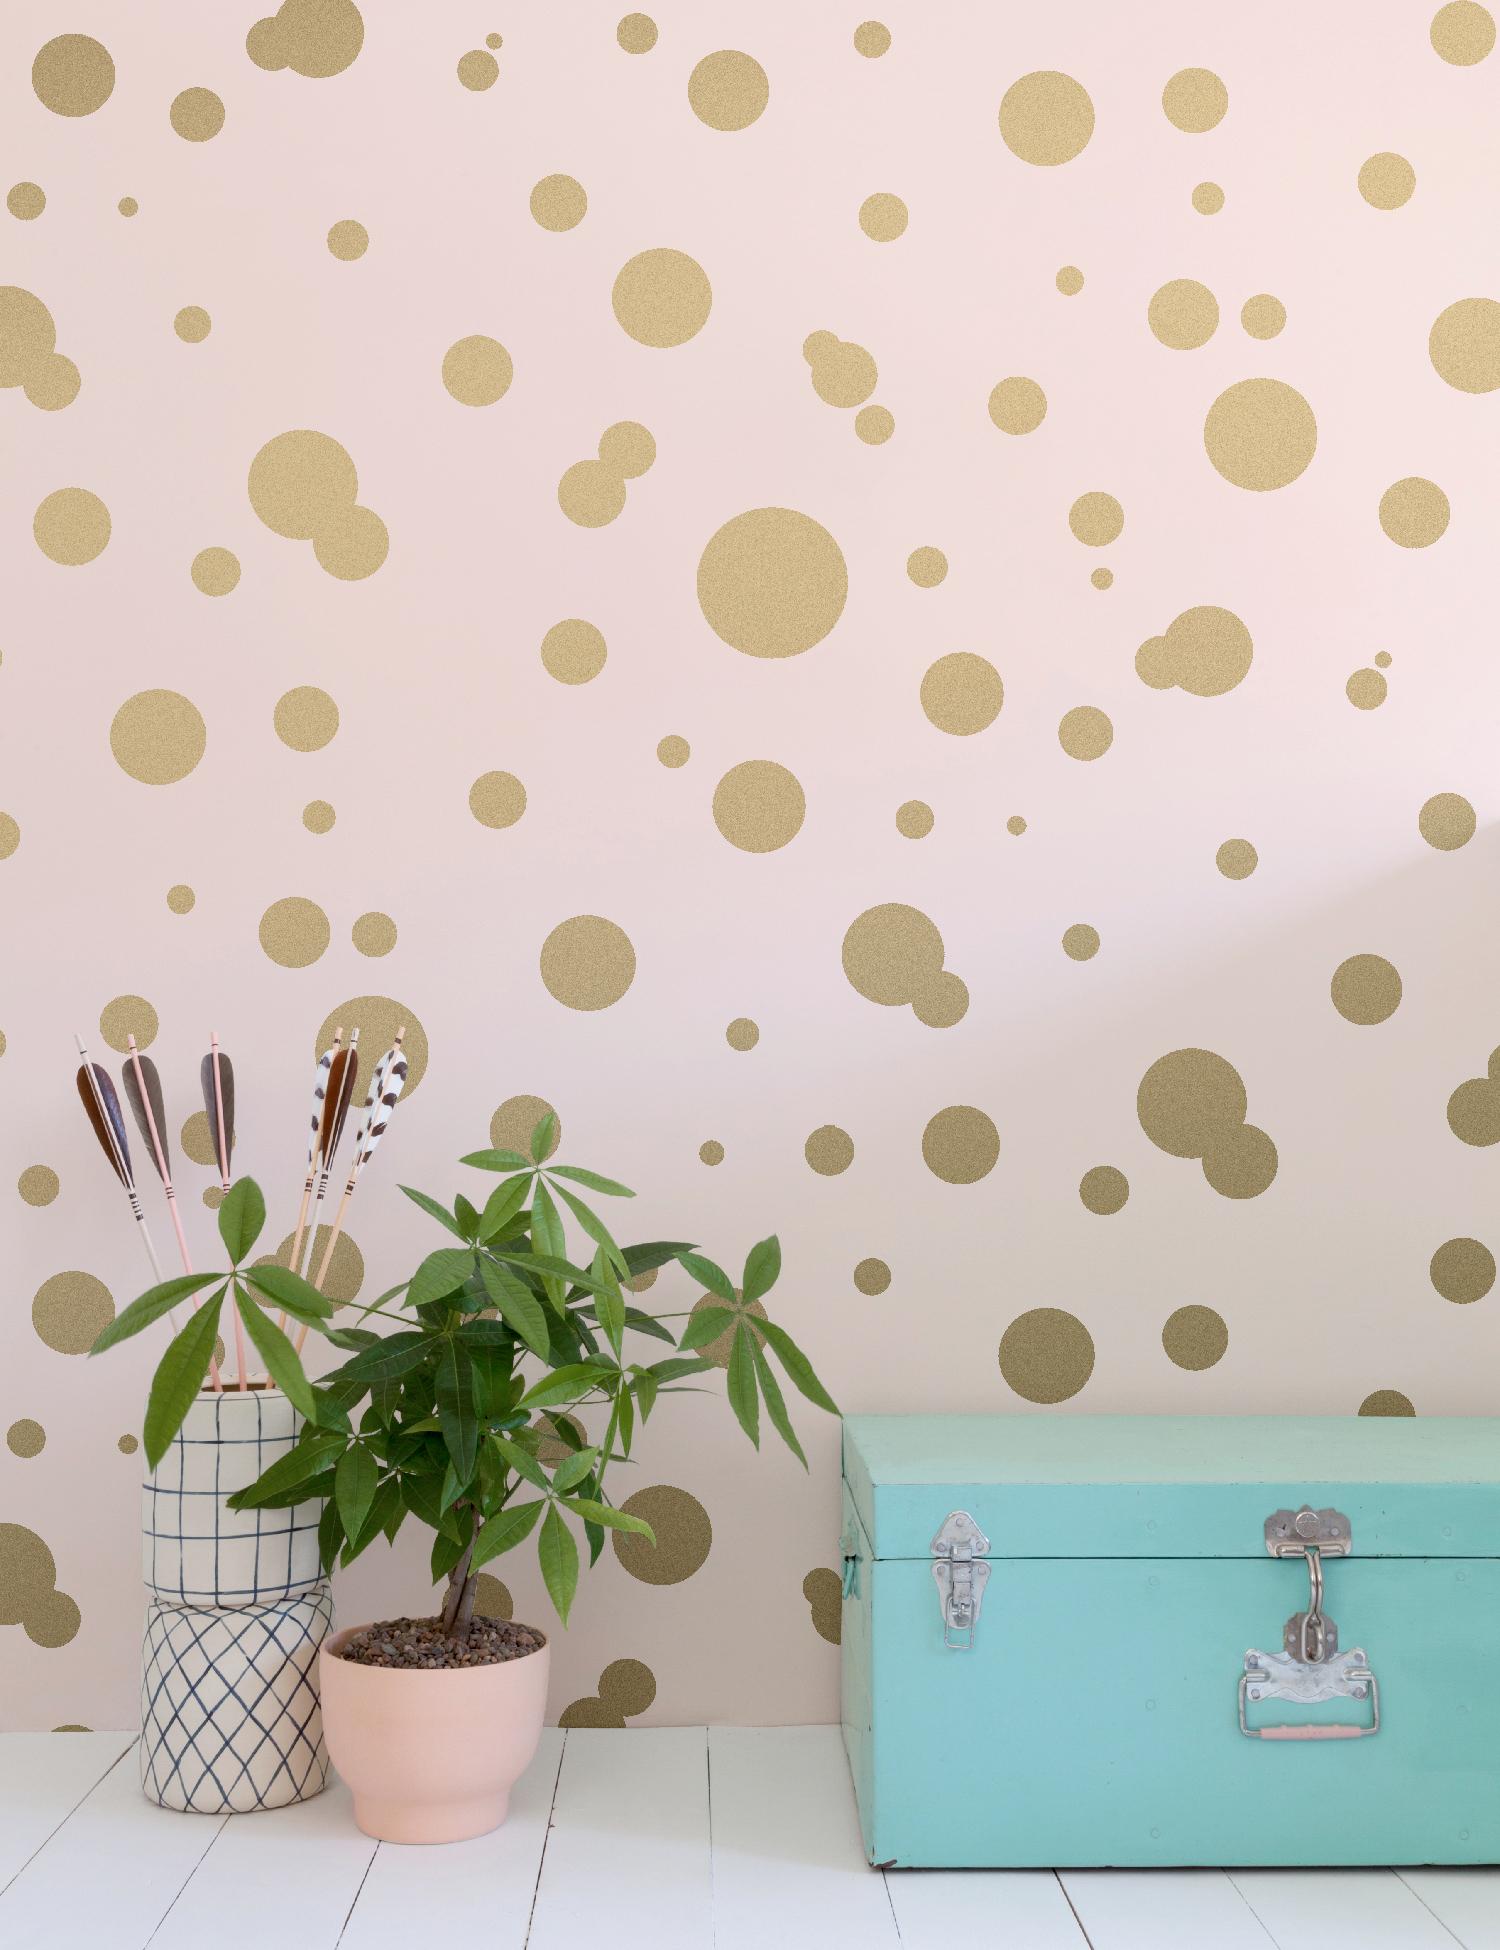 This large-scale repeating bubble pattern is the perfect pattern for your walls!

Samples are available for $18 including US shipping, please message us to purchase.  

Printing: Screen-printed by hand (must be ordered in even increments).
Material: